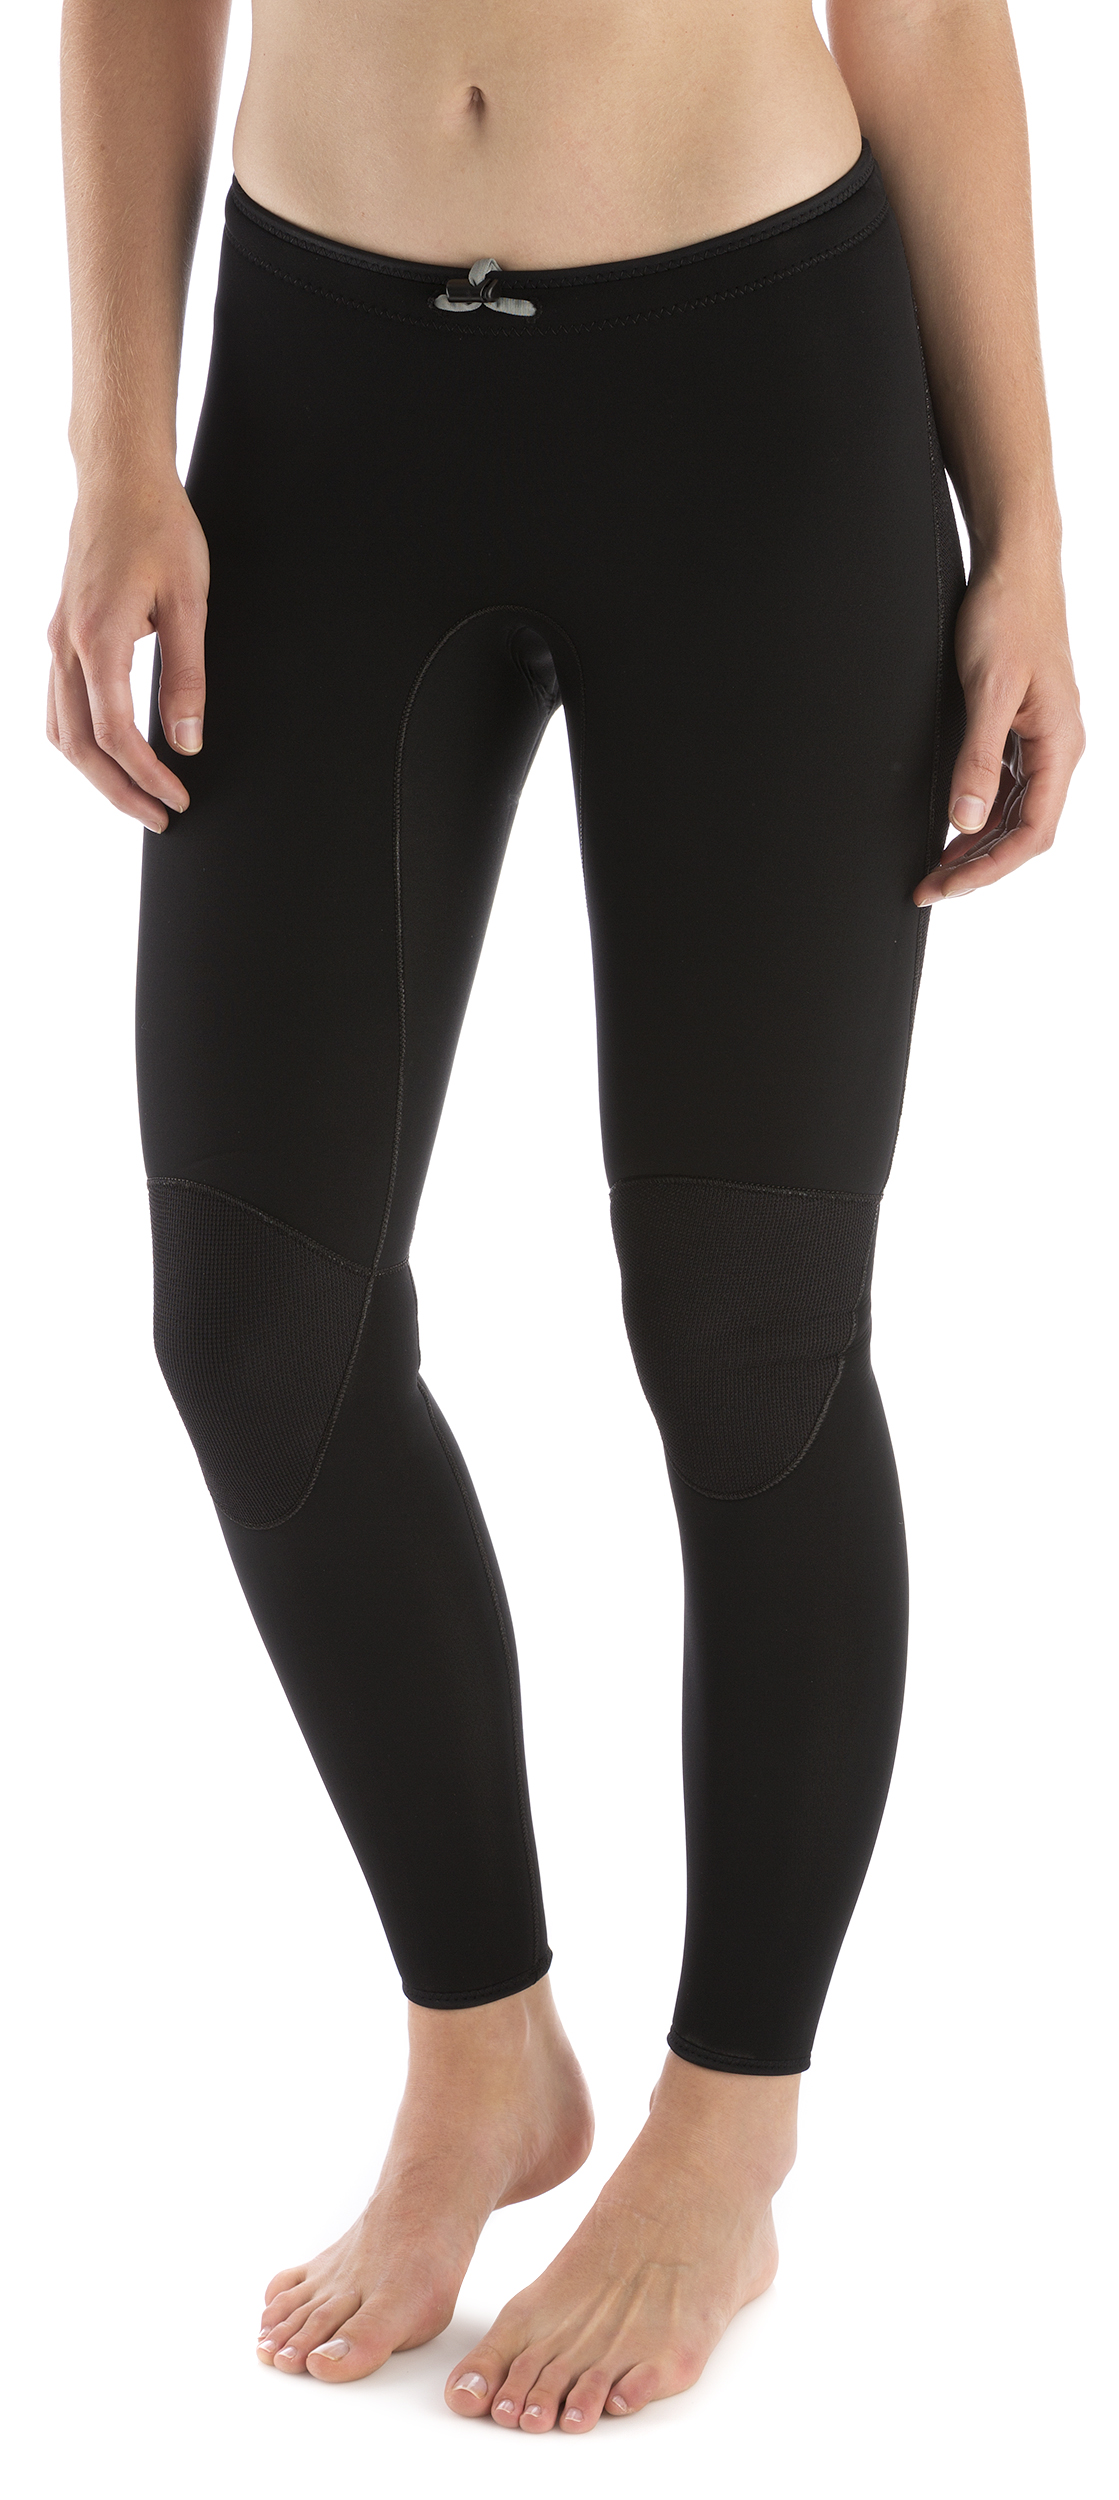 Trying out the new #gillmarine Women's Pursuit Neoprene Leggings & Jac